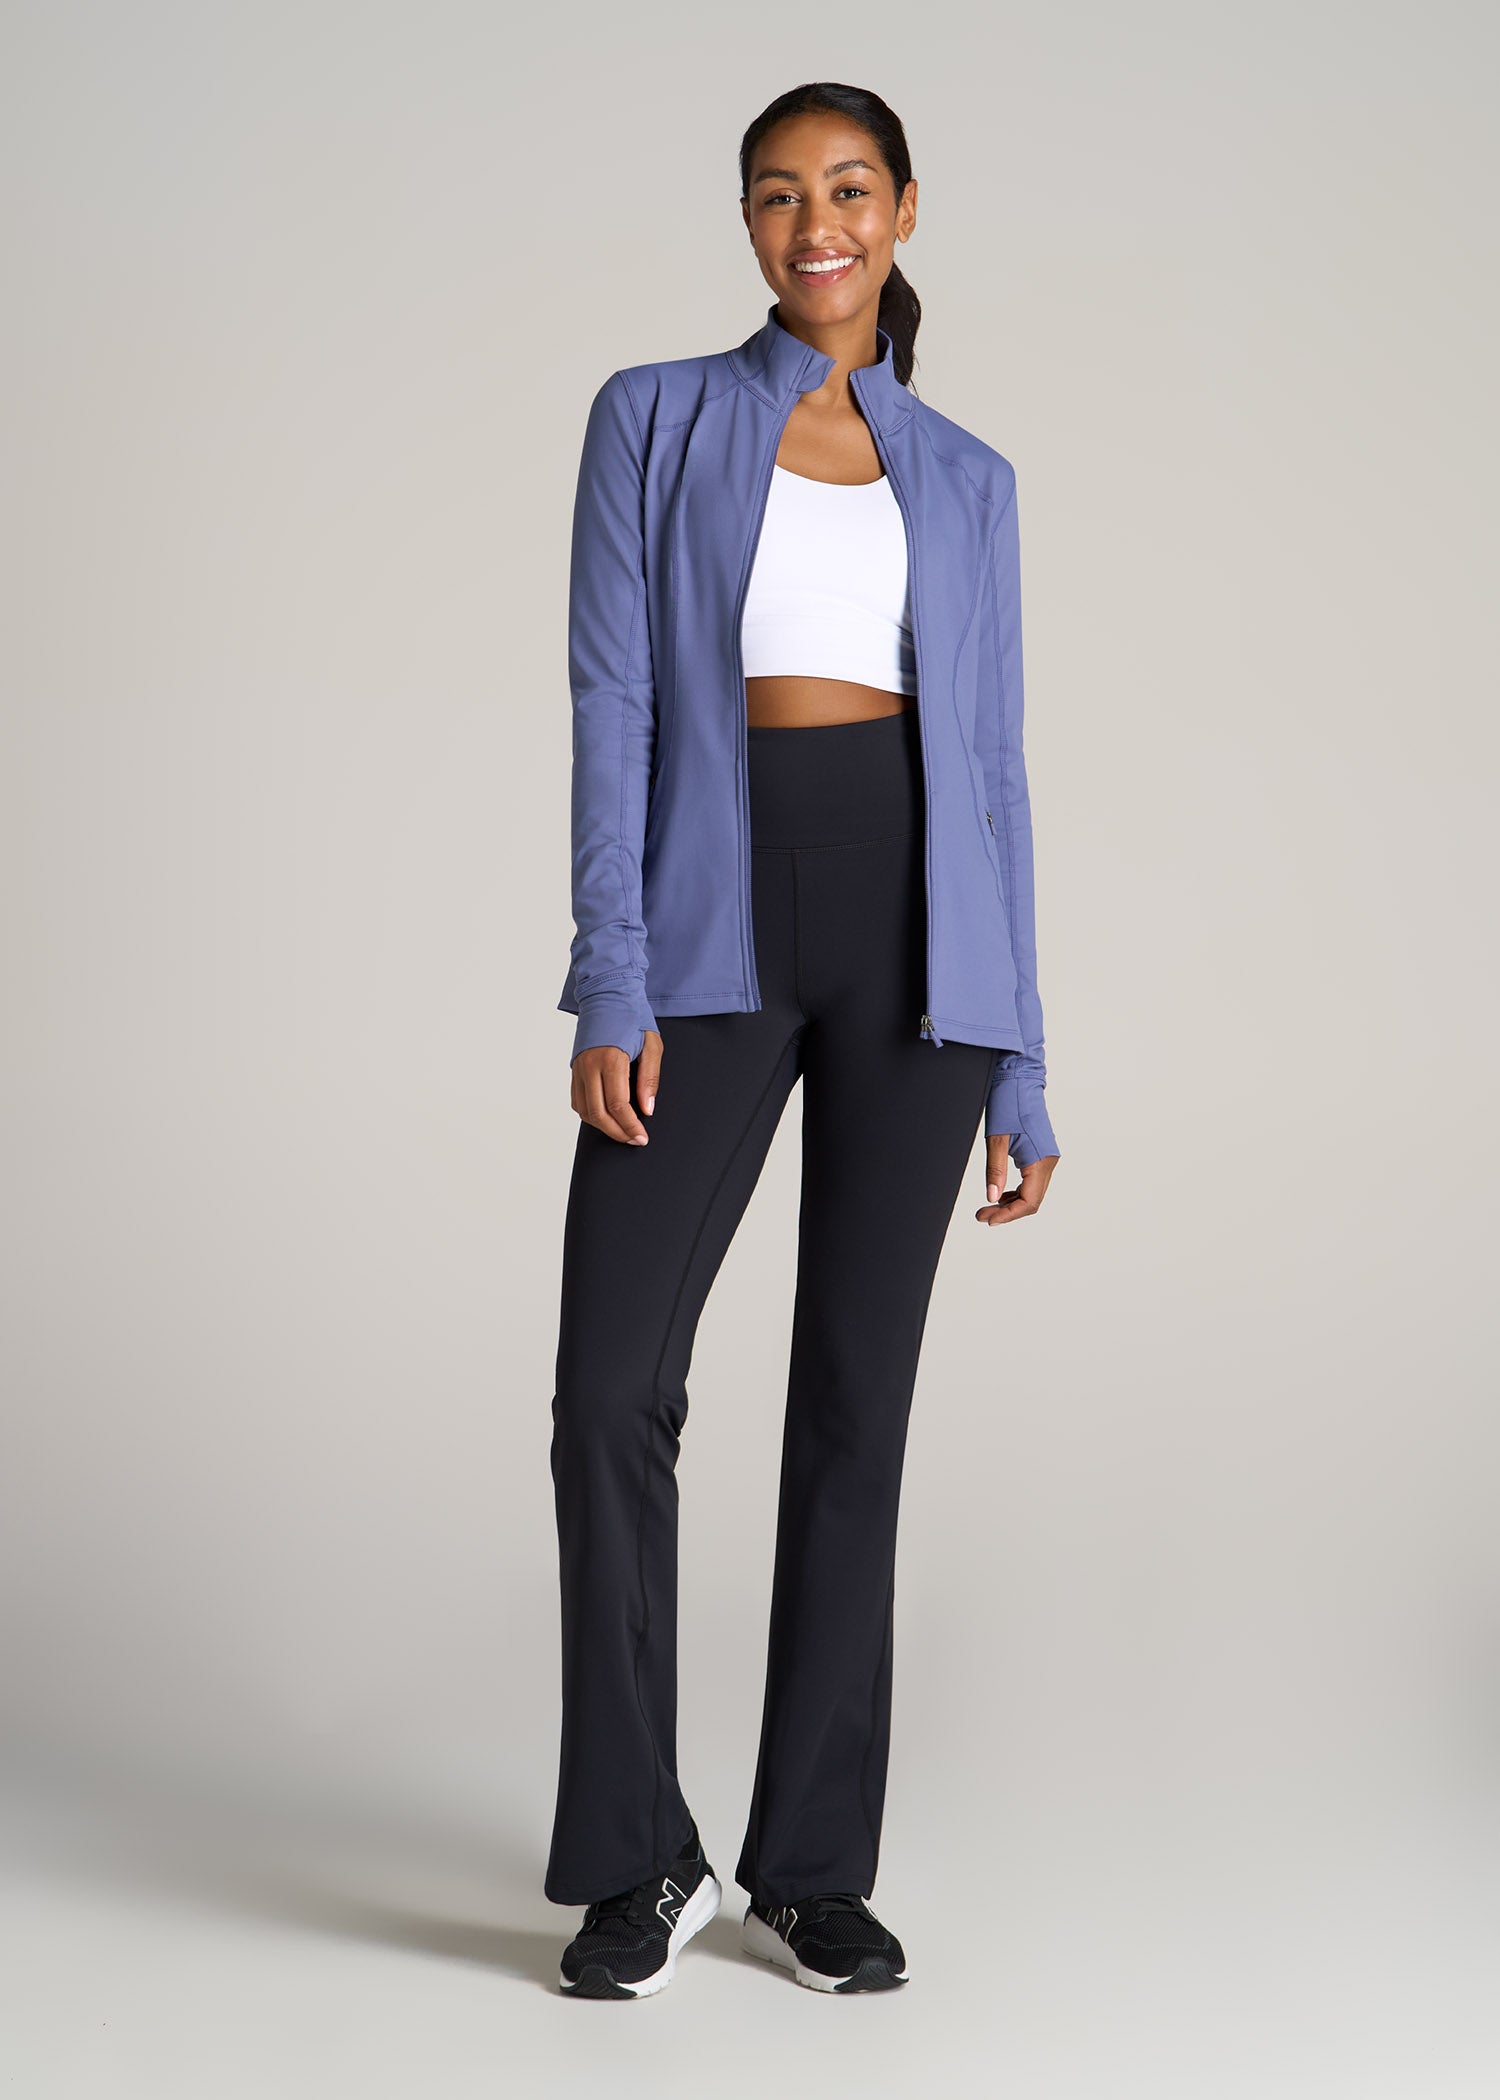 Warm-Up Athletic Tall Women's Jacket